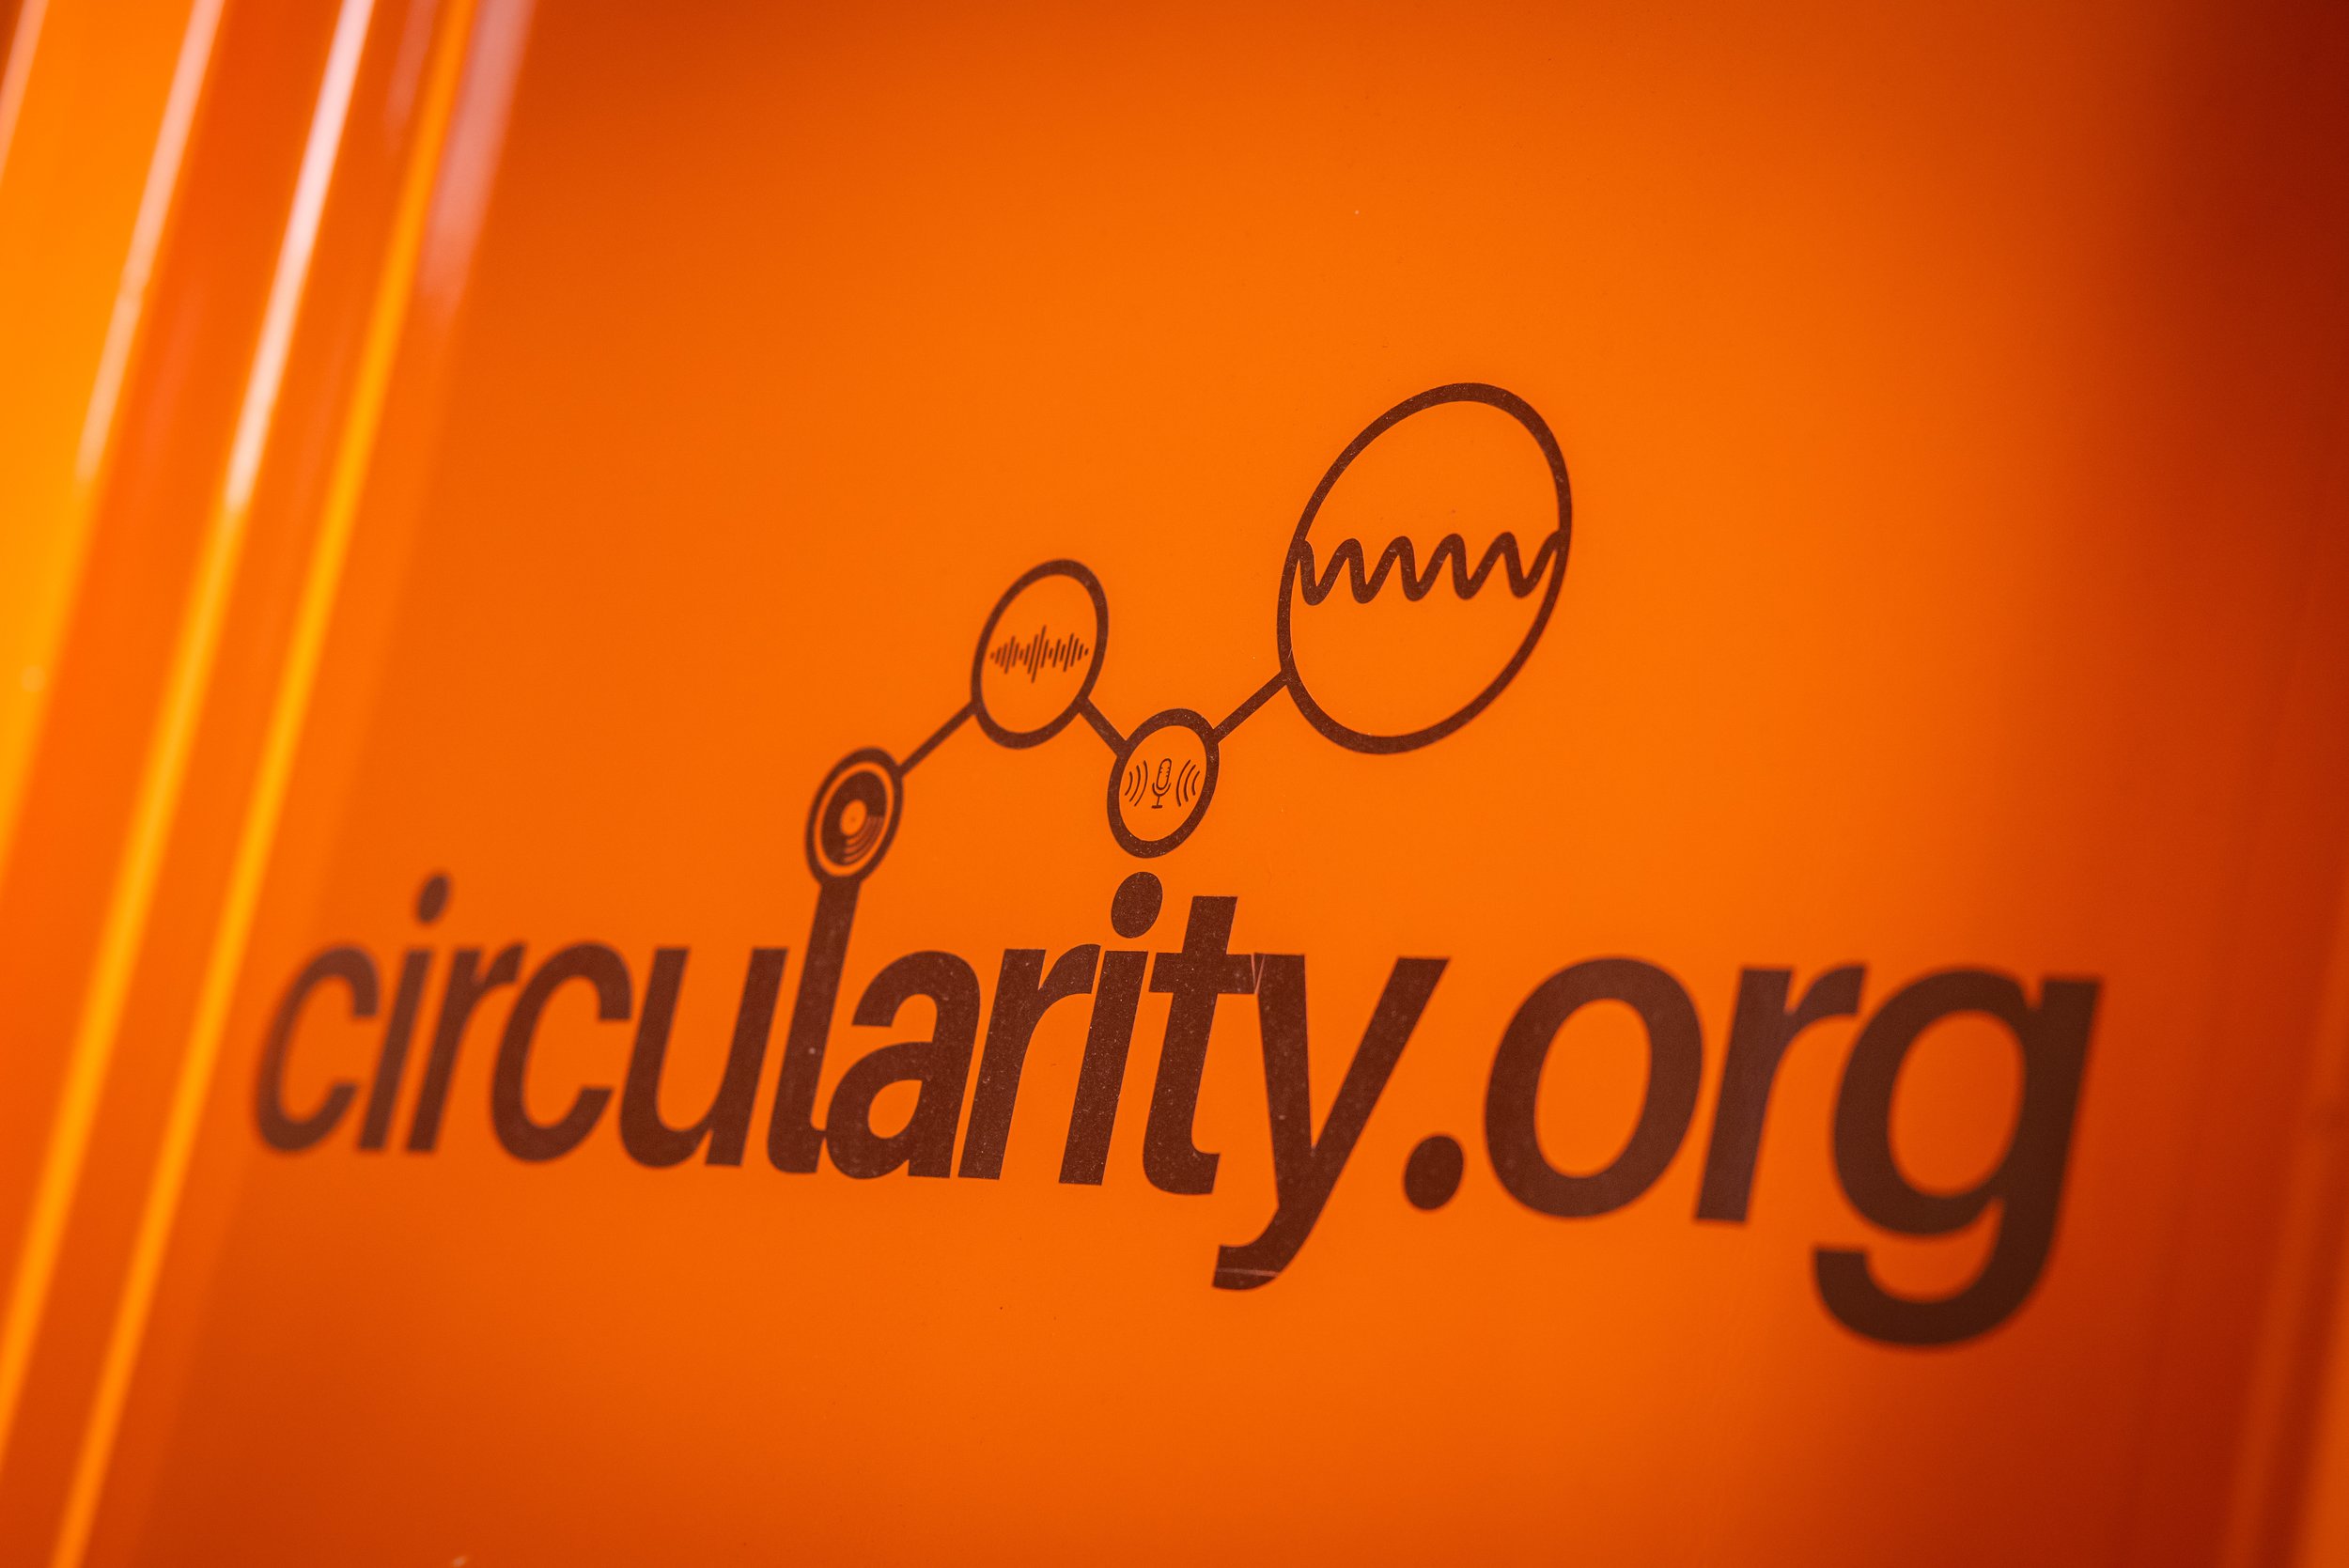 Circularity by Pictoriapictures.com - November 2022-128.jpg